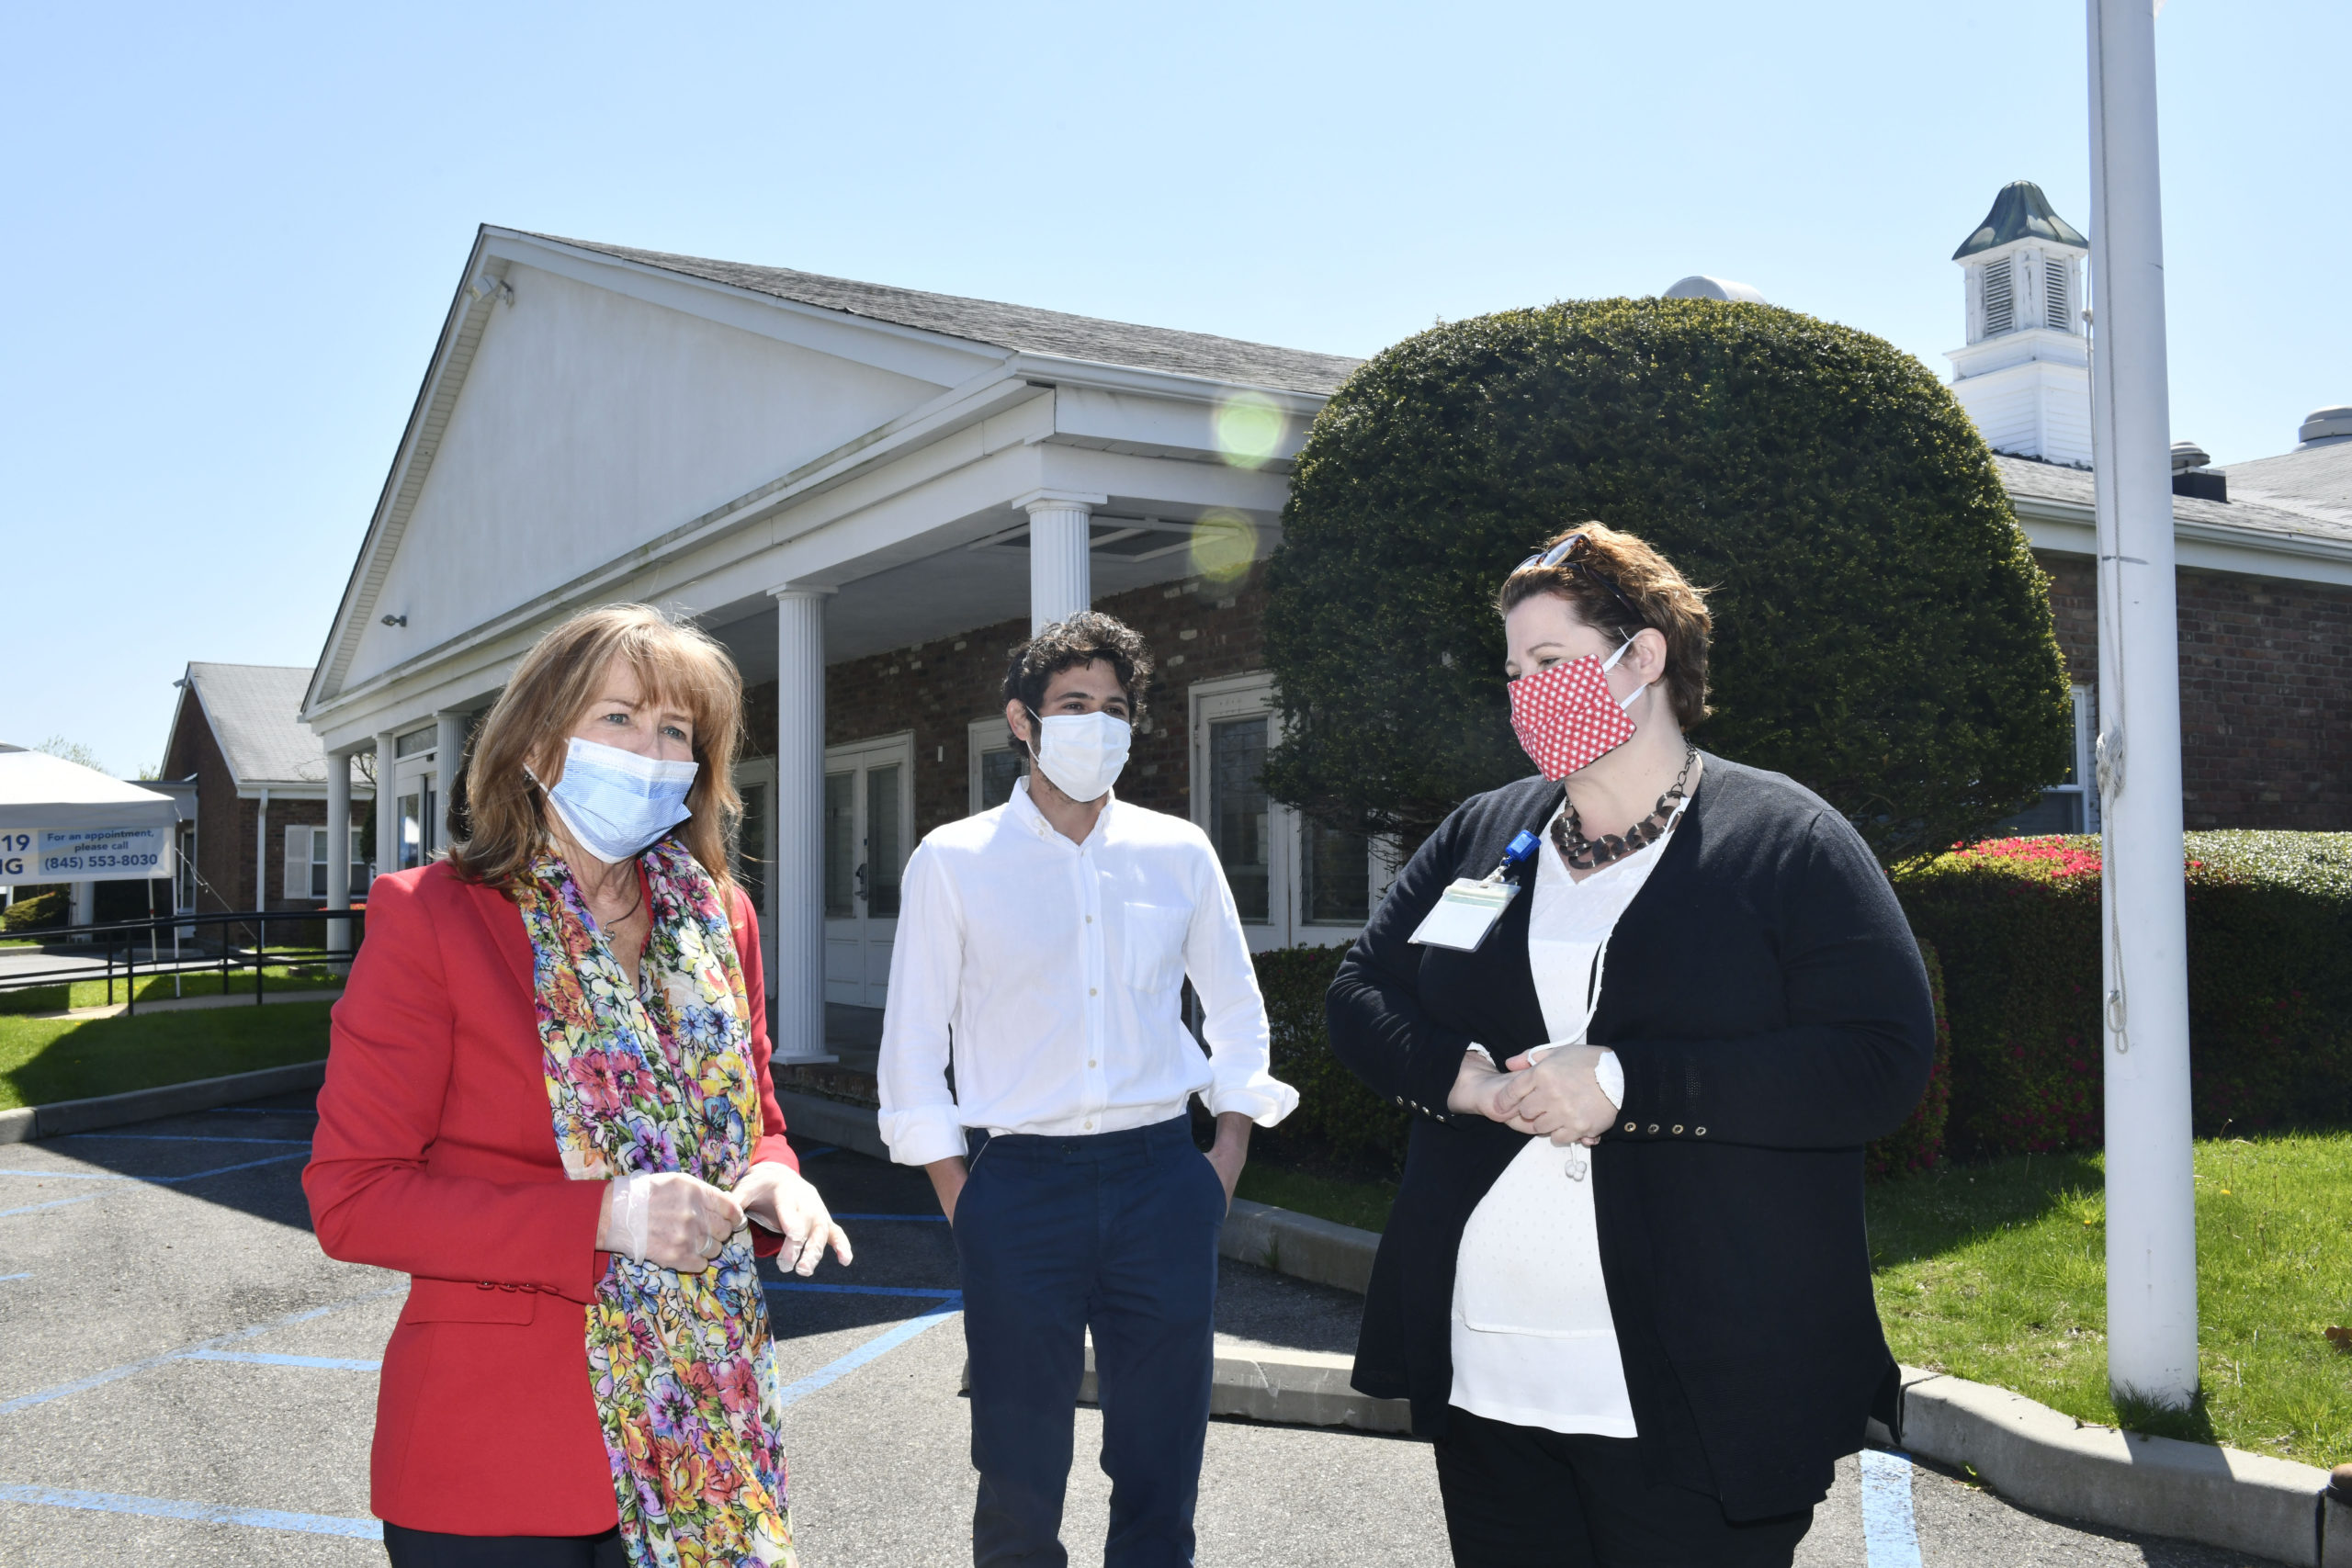 Anne Kauffman Nolon, CEO of HRHCare, Southampton Village Mayor Jesse Warren and Allison Dubois, MPH Chief Operating Officer and Executive Vice President of HRHCare at the Southampton tersting site on Thursday, May 7.  DANA SHAW